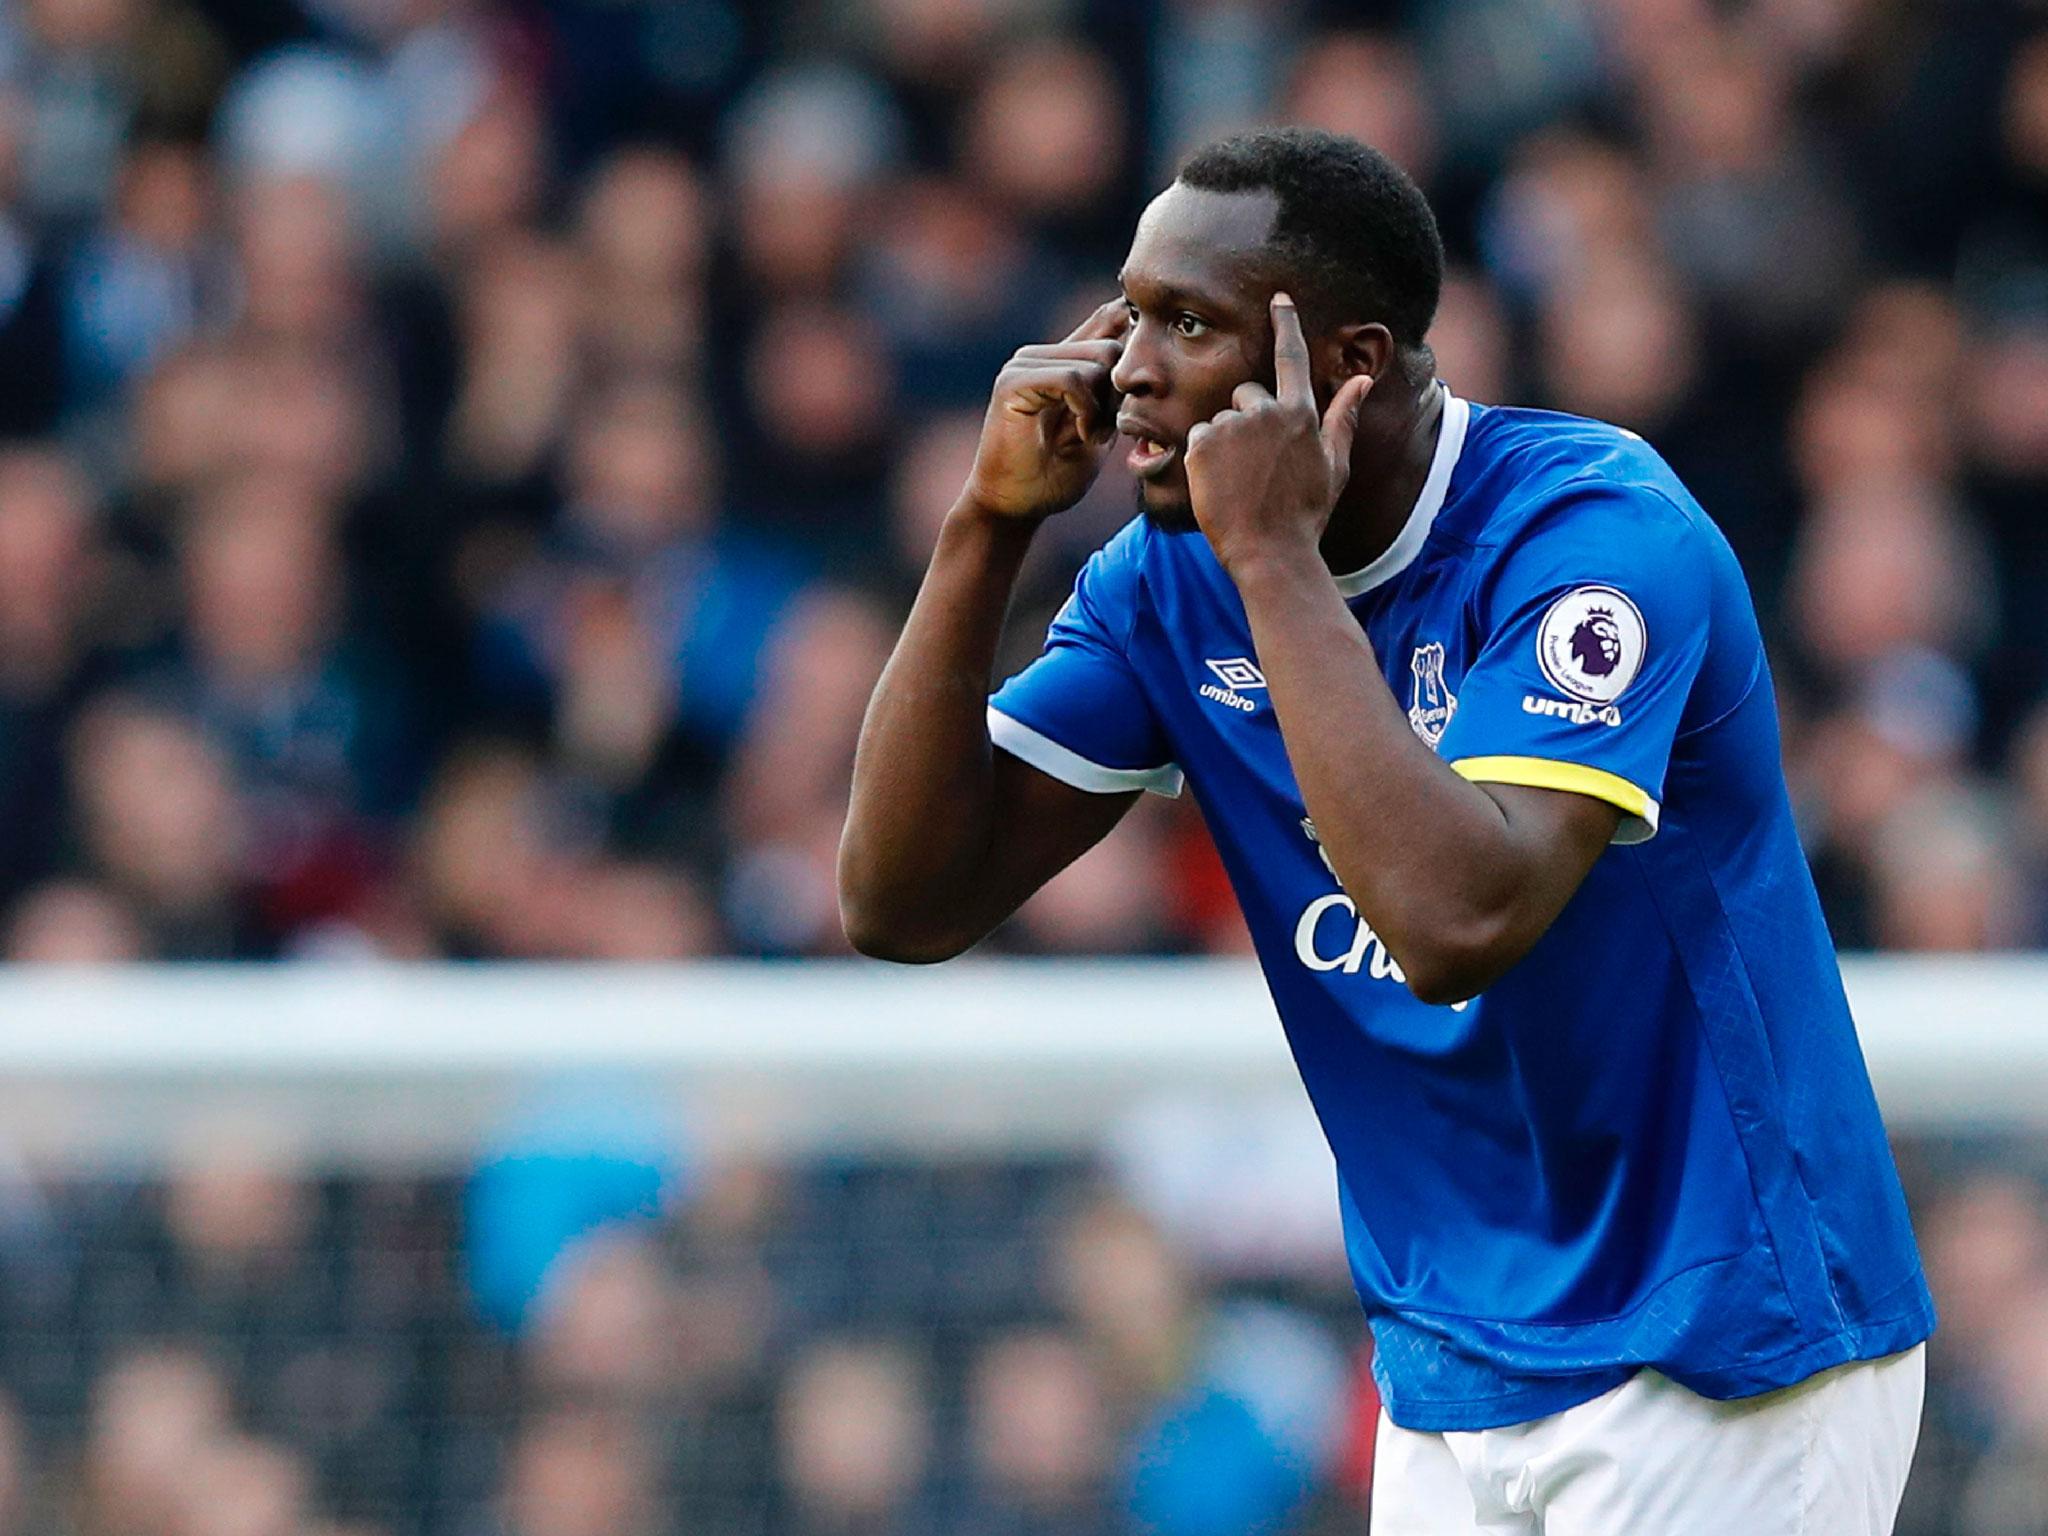 Romelu Lukaku rejected an offer of a new contract earlier this week